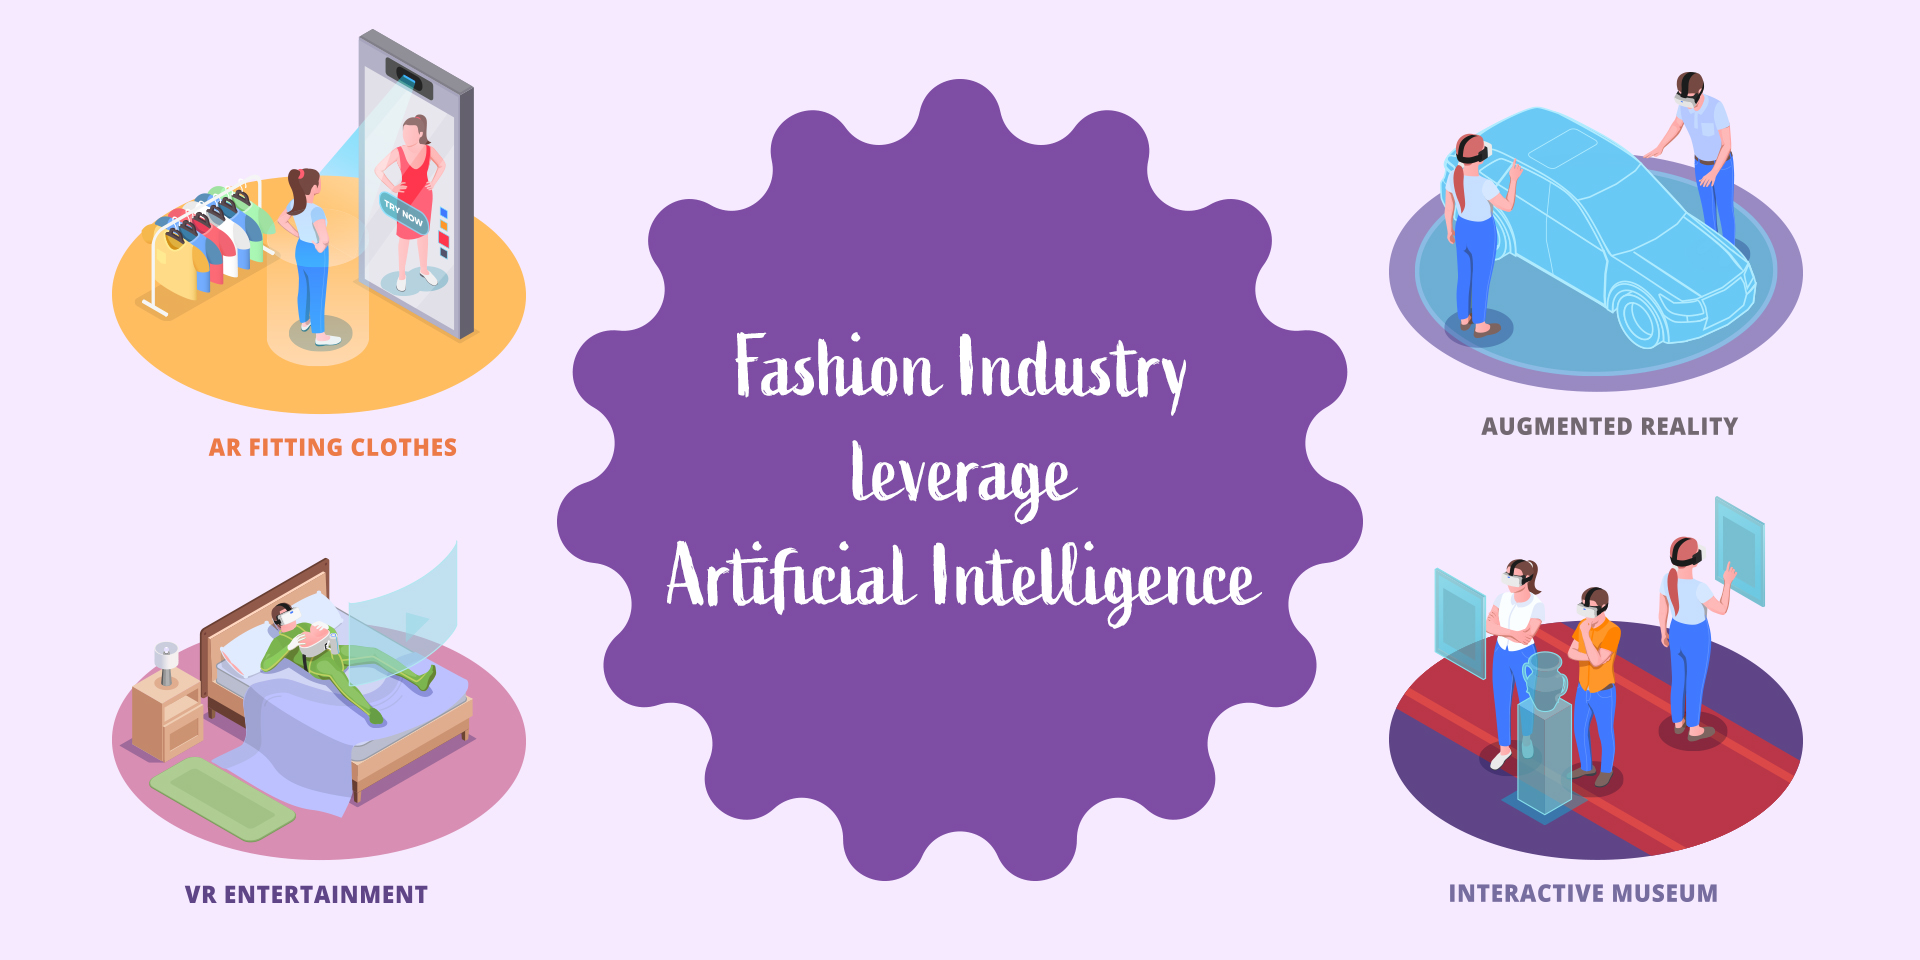 How is The Use of AI in the Fashion Industry Transforming It?